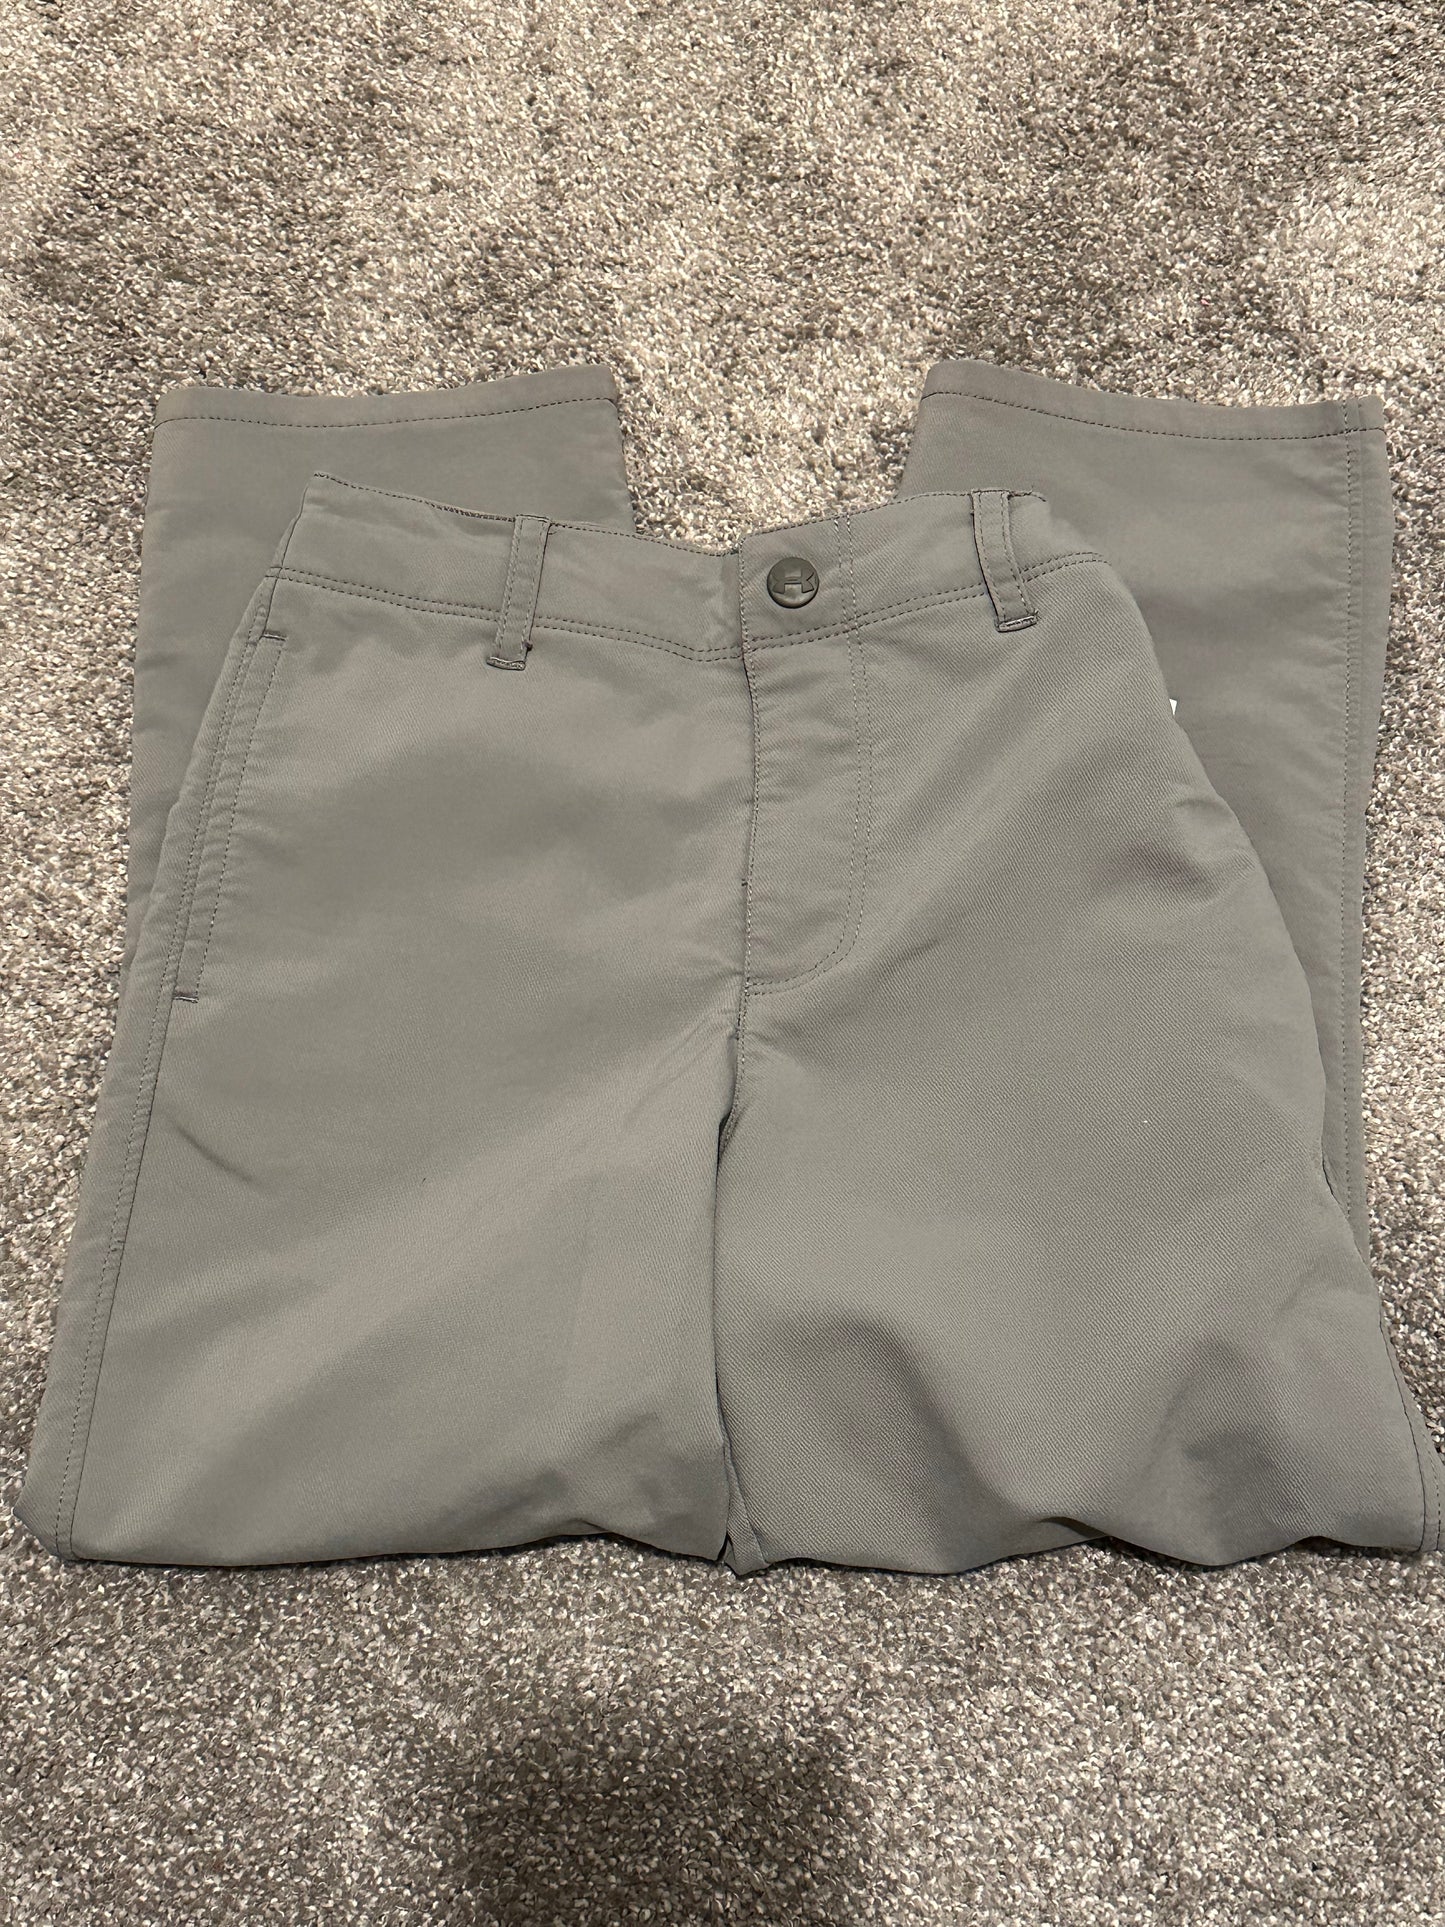 Under armour Sz 6 Boys Gray Golf Pants Pick up in Milford 45244